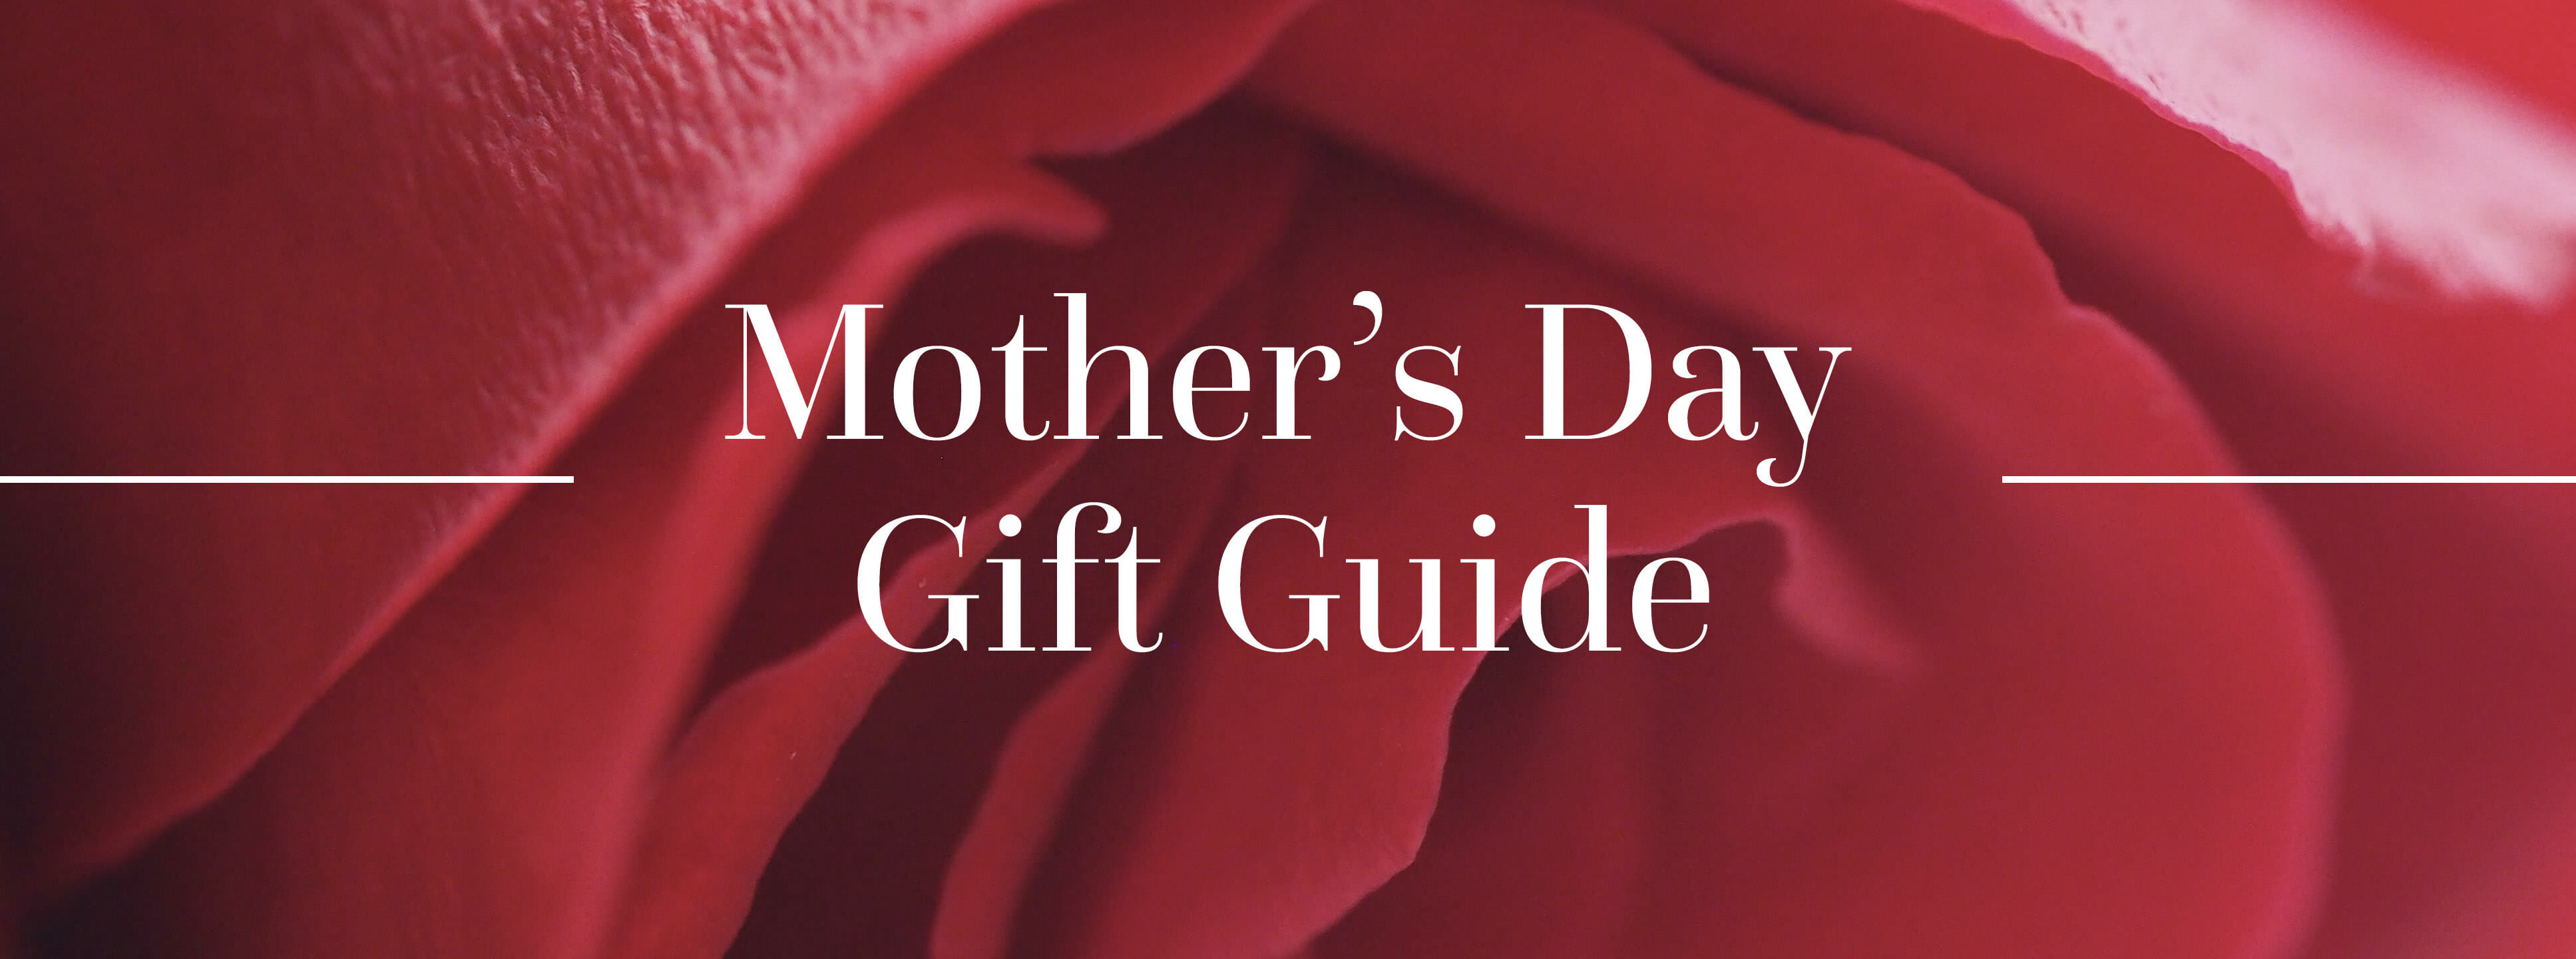 mothers day gift guide 2018